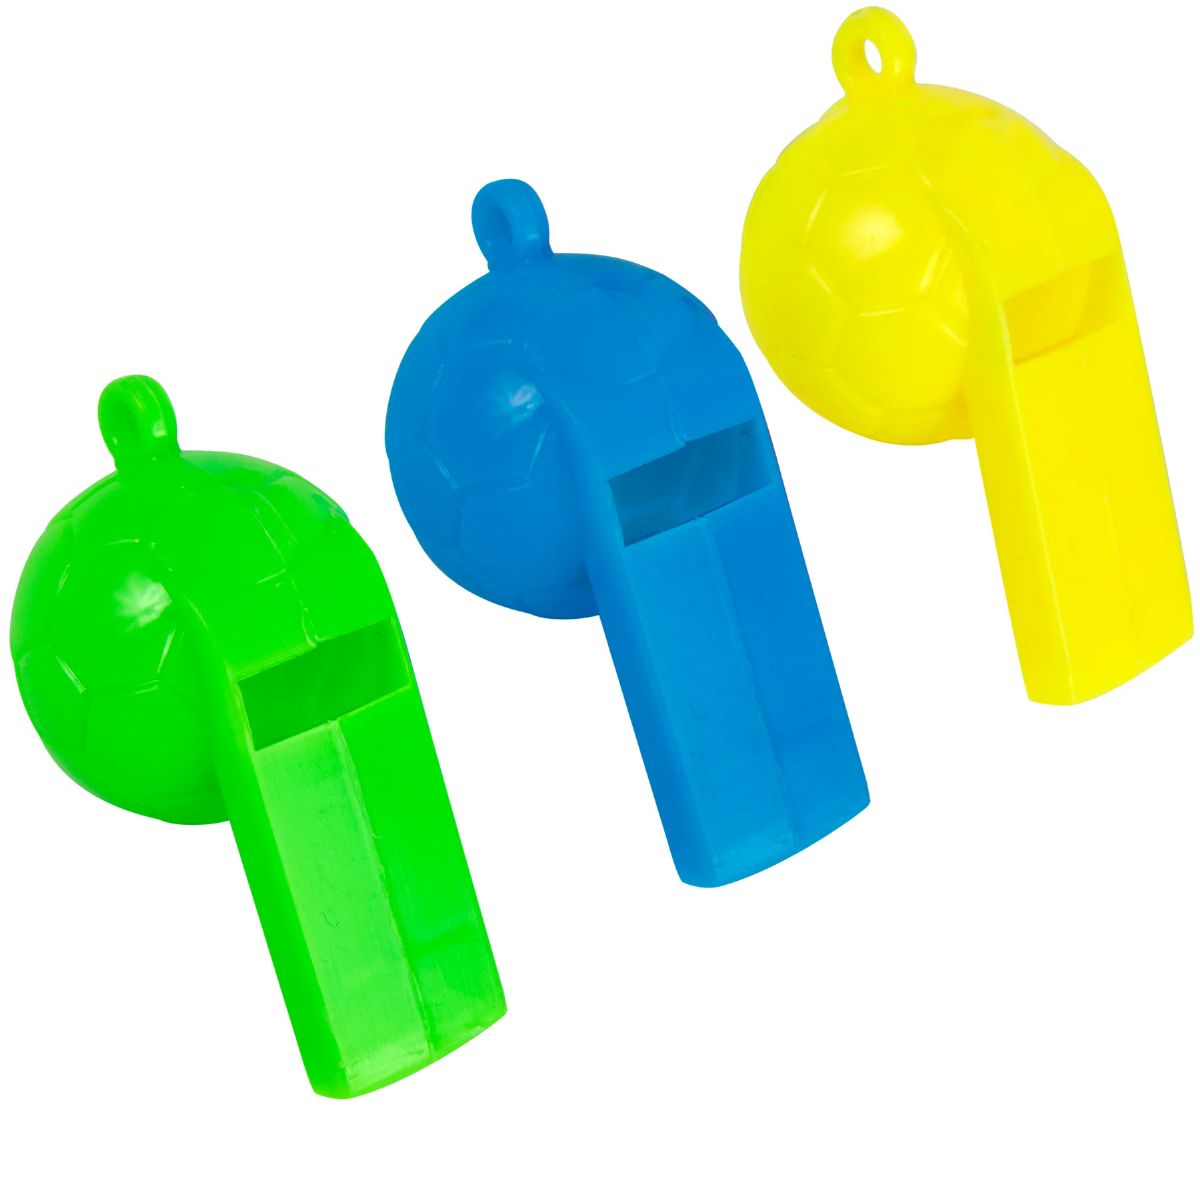 50 Pieces of Plastic Toy Soccer Ball Whistles